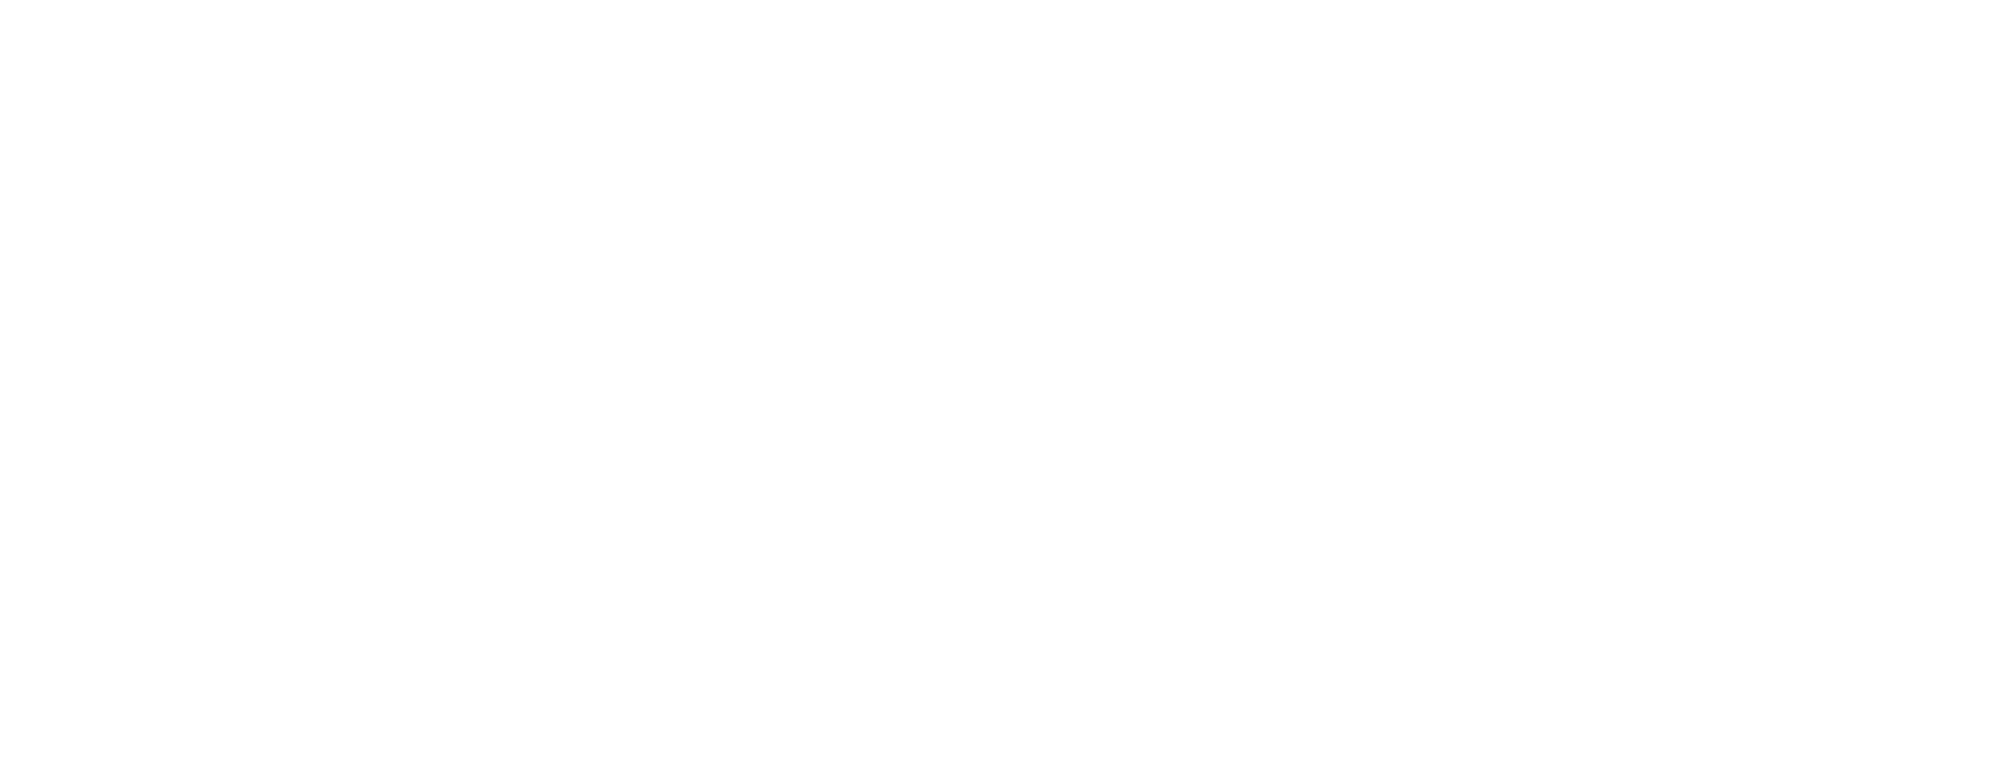 OpenFF Toolkit 0.11.3+0.g372e48c5.dirty documentation logo